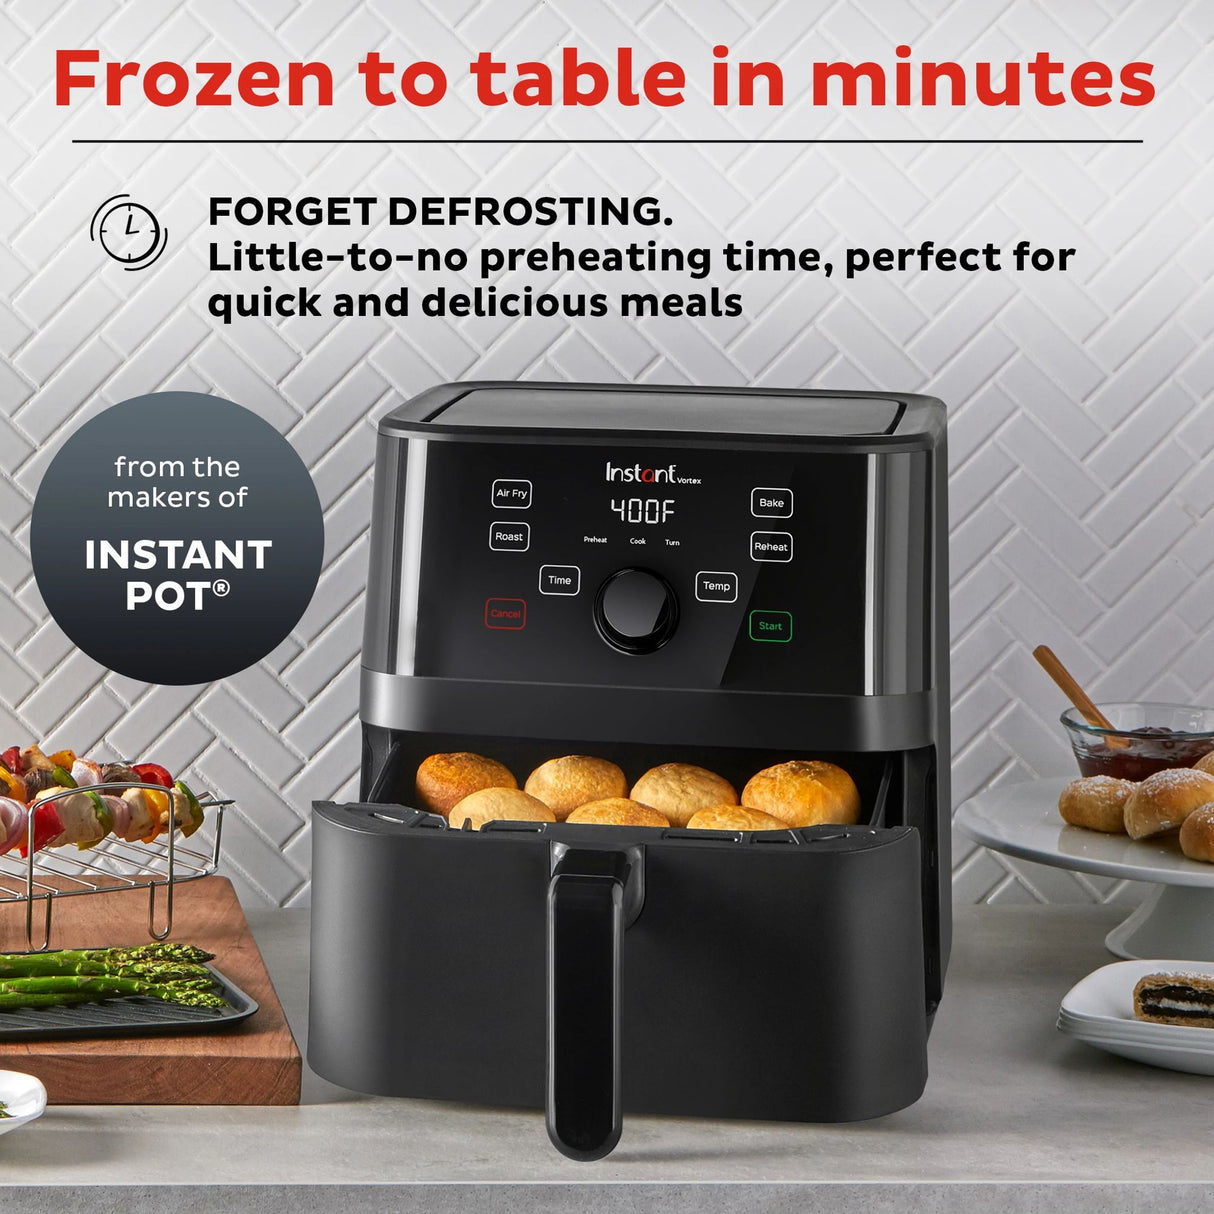  Instant™  Vortex™ 5.7-quart Air Fryer with text Frozen to table in minutes